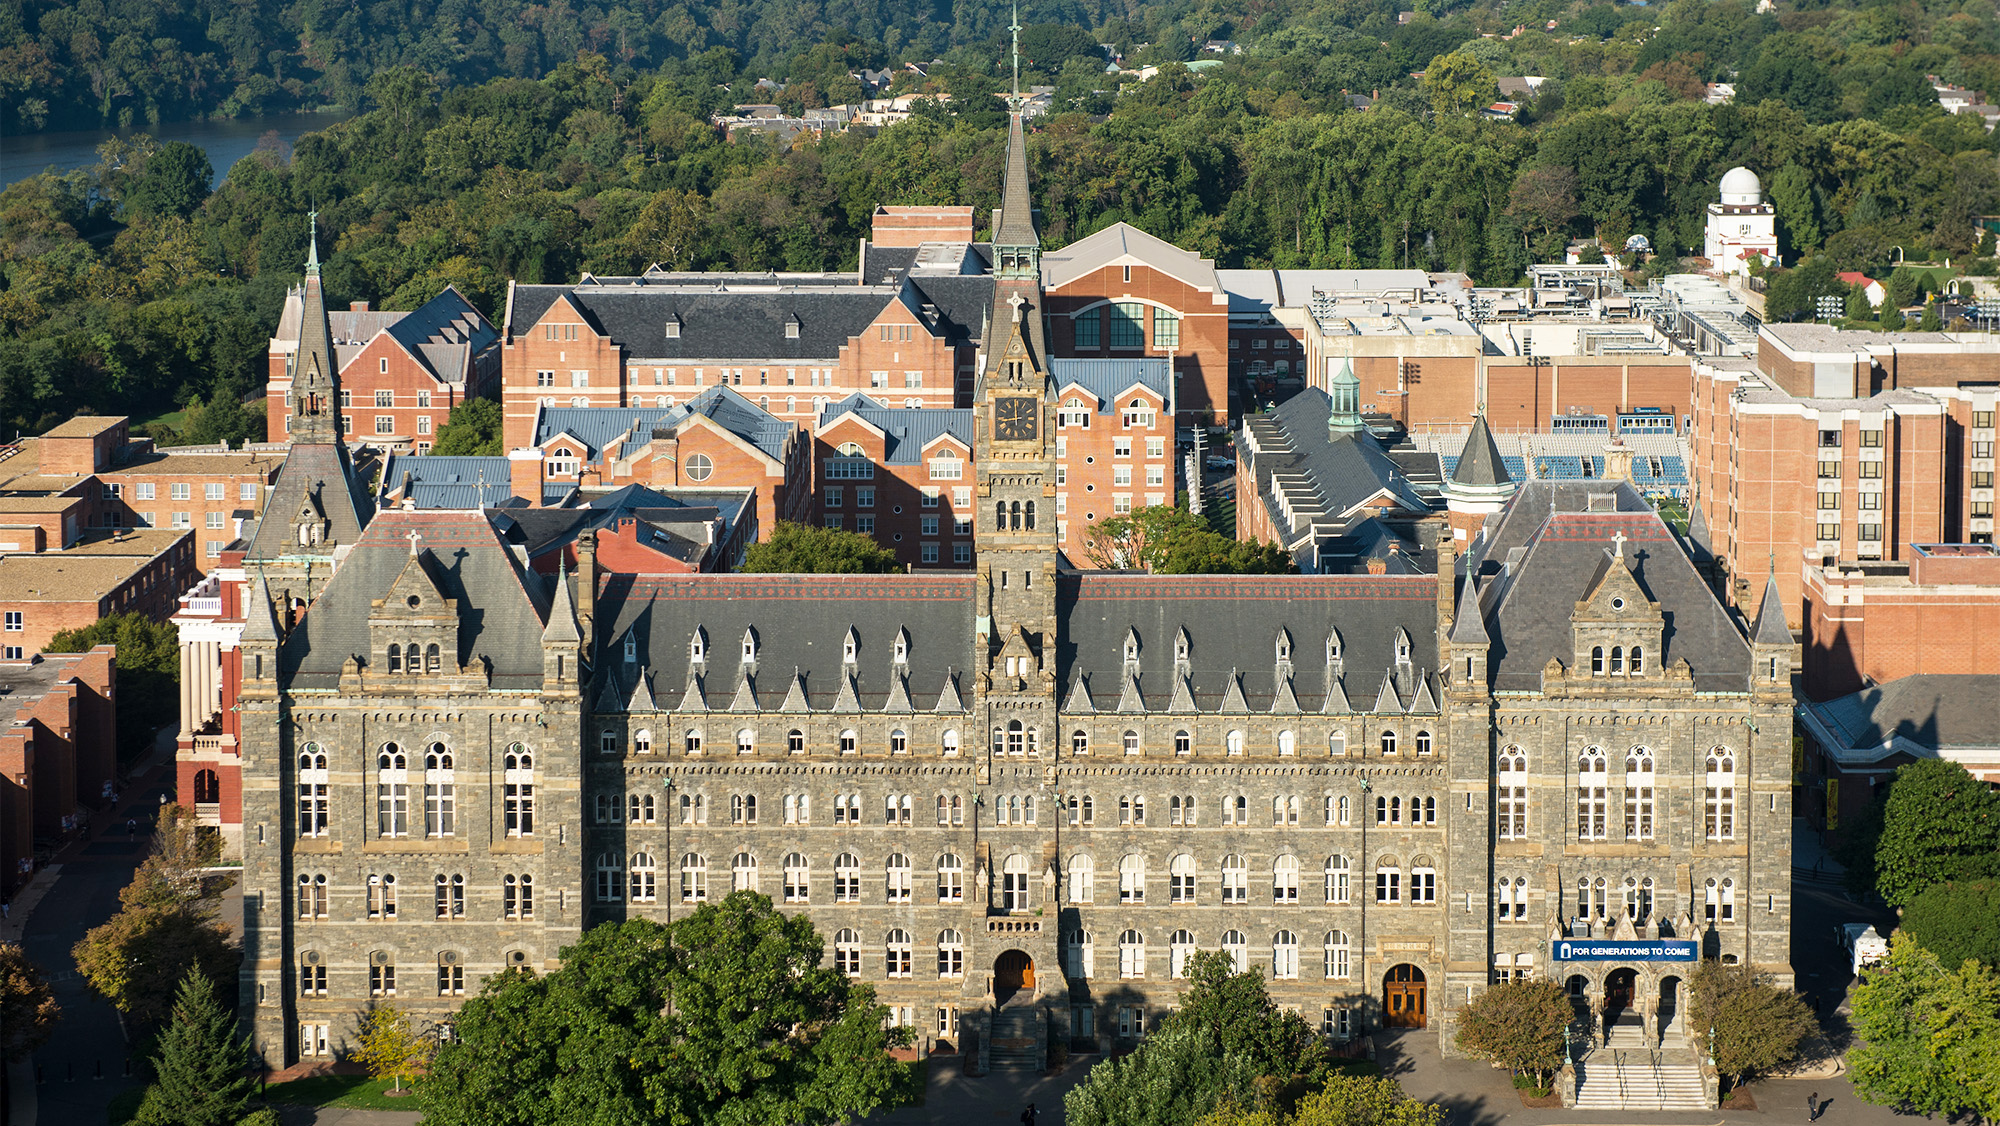 Healy Hall on campus